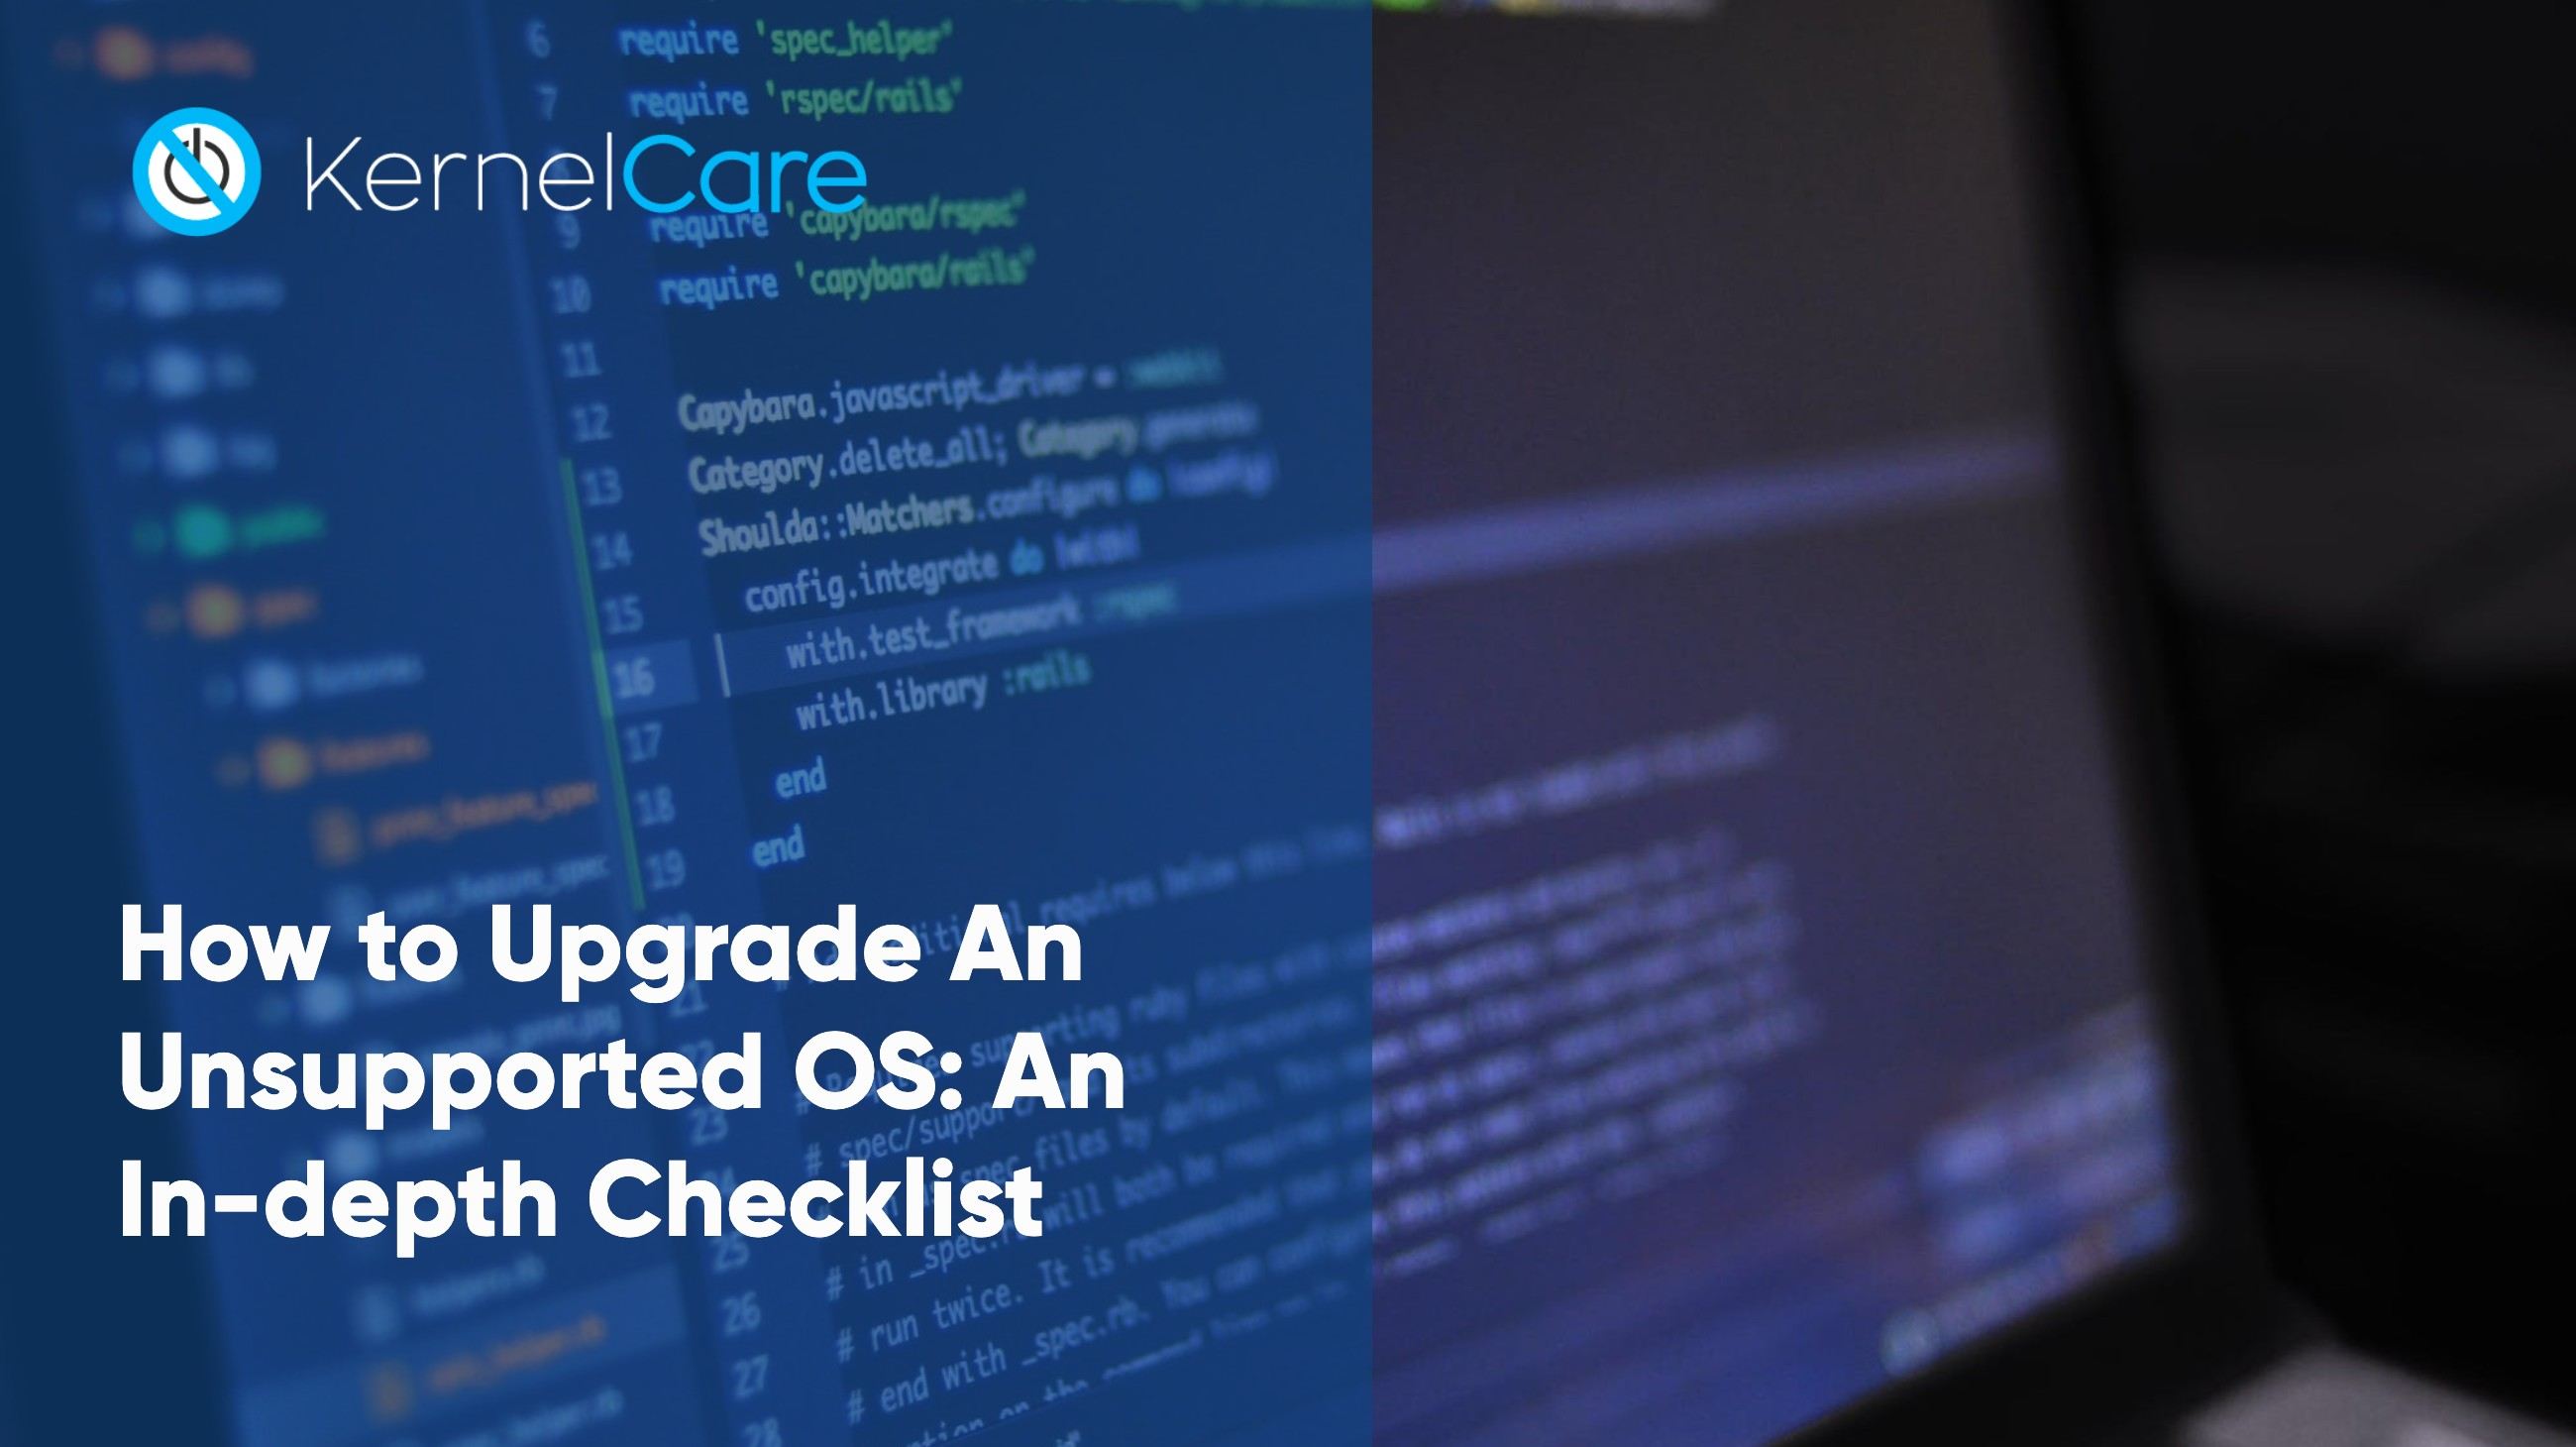 How to Upgrade An Unsupported OS: An In-depth Checklist